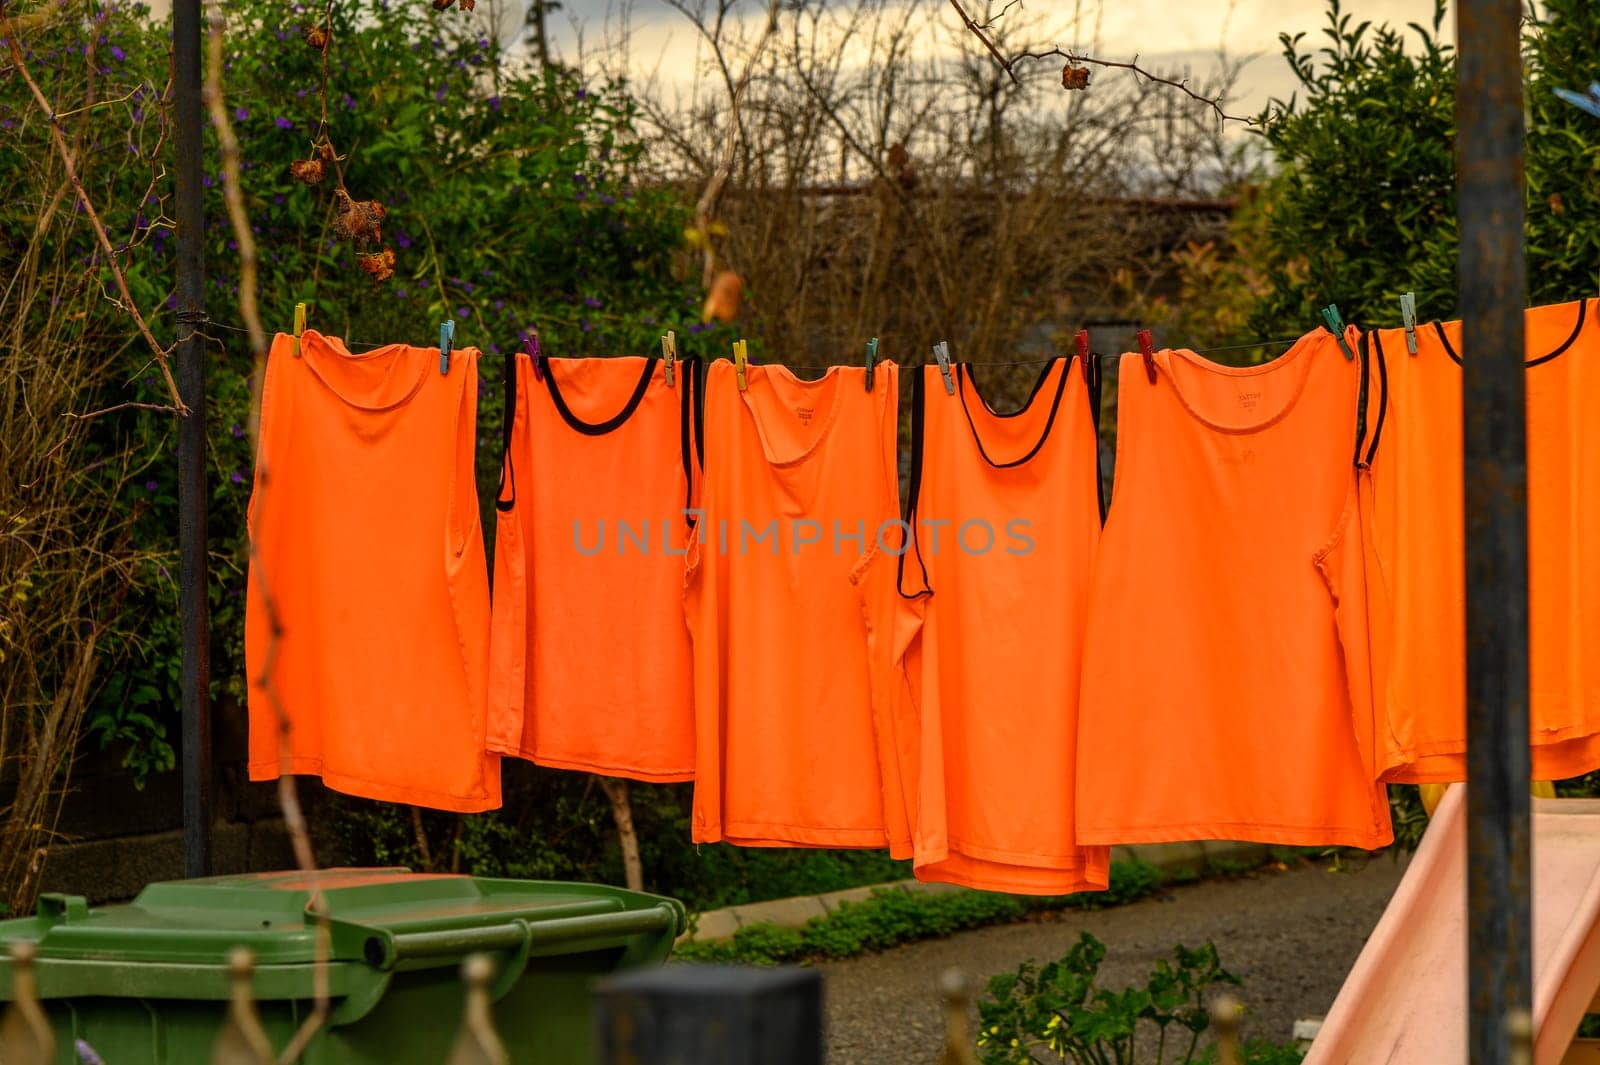 orange t-shirts drying on a line in winter in Cyprus 2 by Mixa74